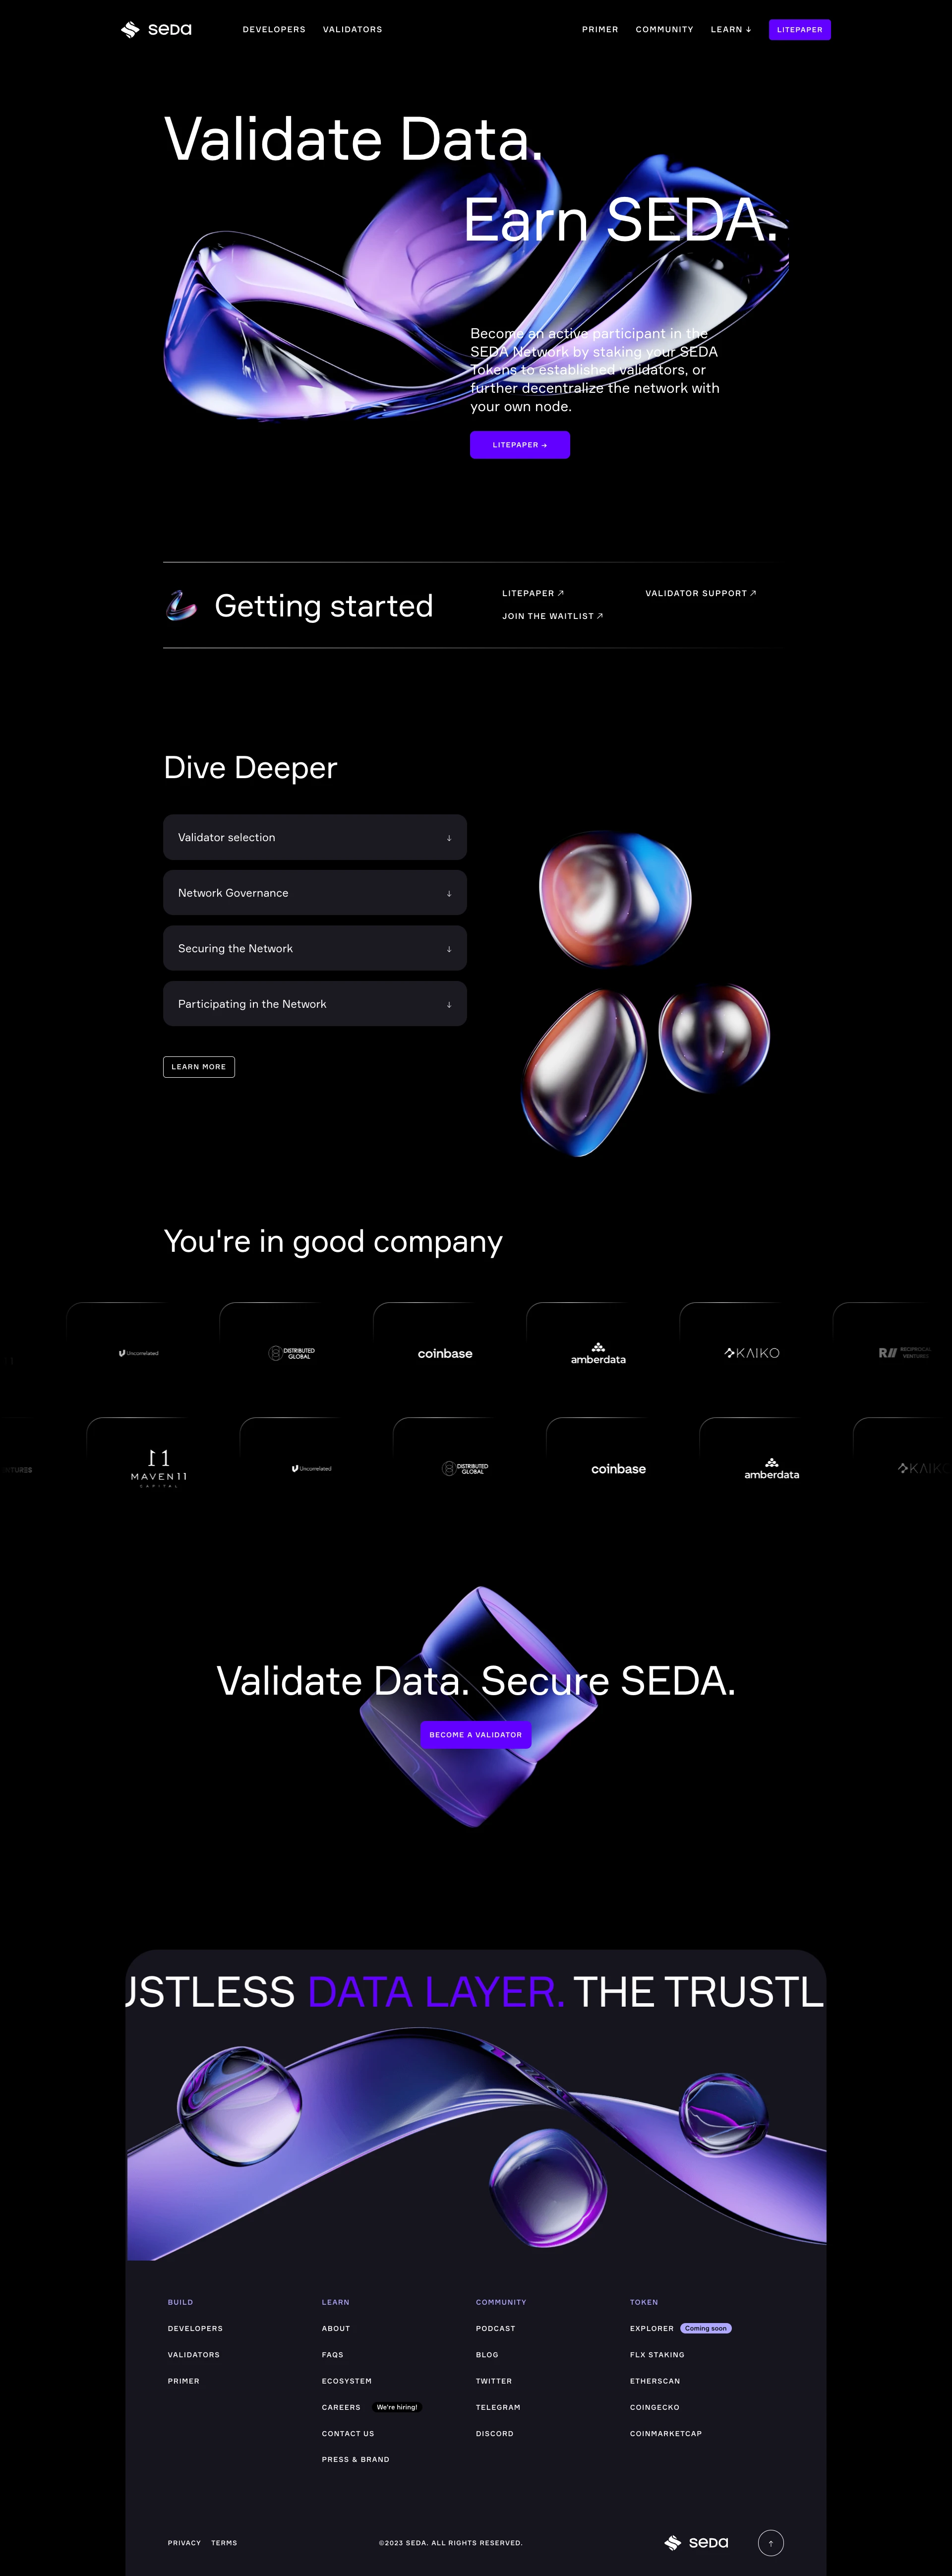 SEDA Landing Page Example: A Foundation for Data in web3. SEDA creates a standard for data interoperability enabling the future of connectivity.